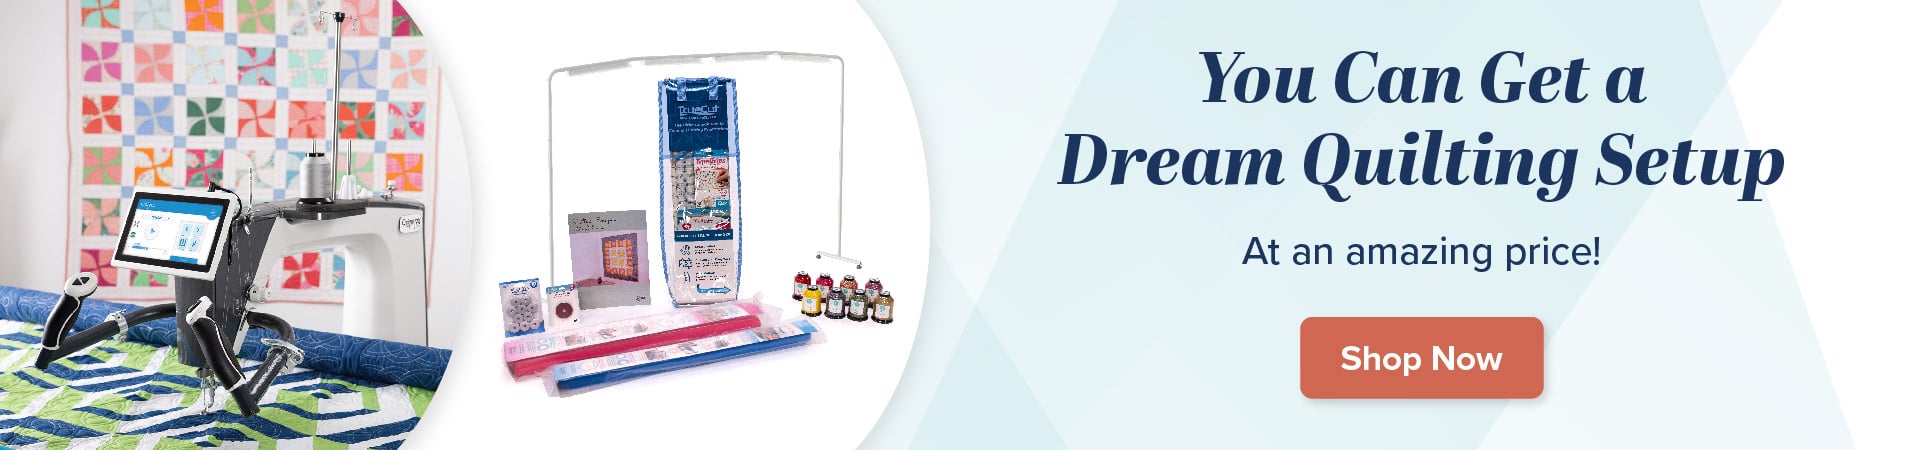 You can get a dream quilting setup at an amazing price. Shop now.